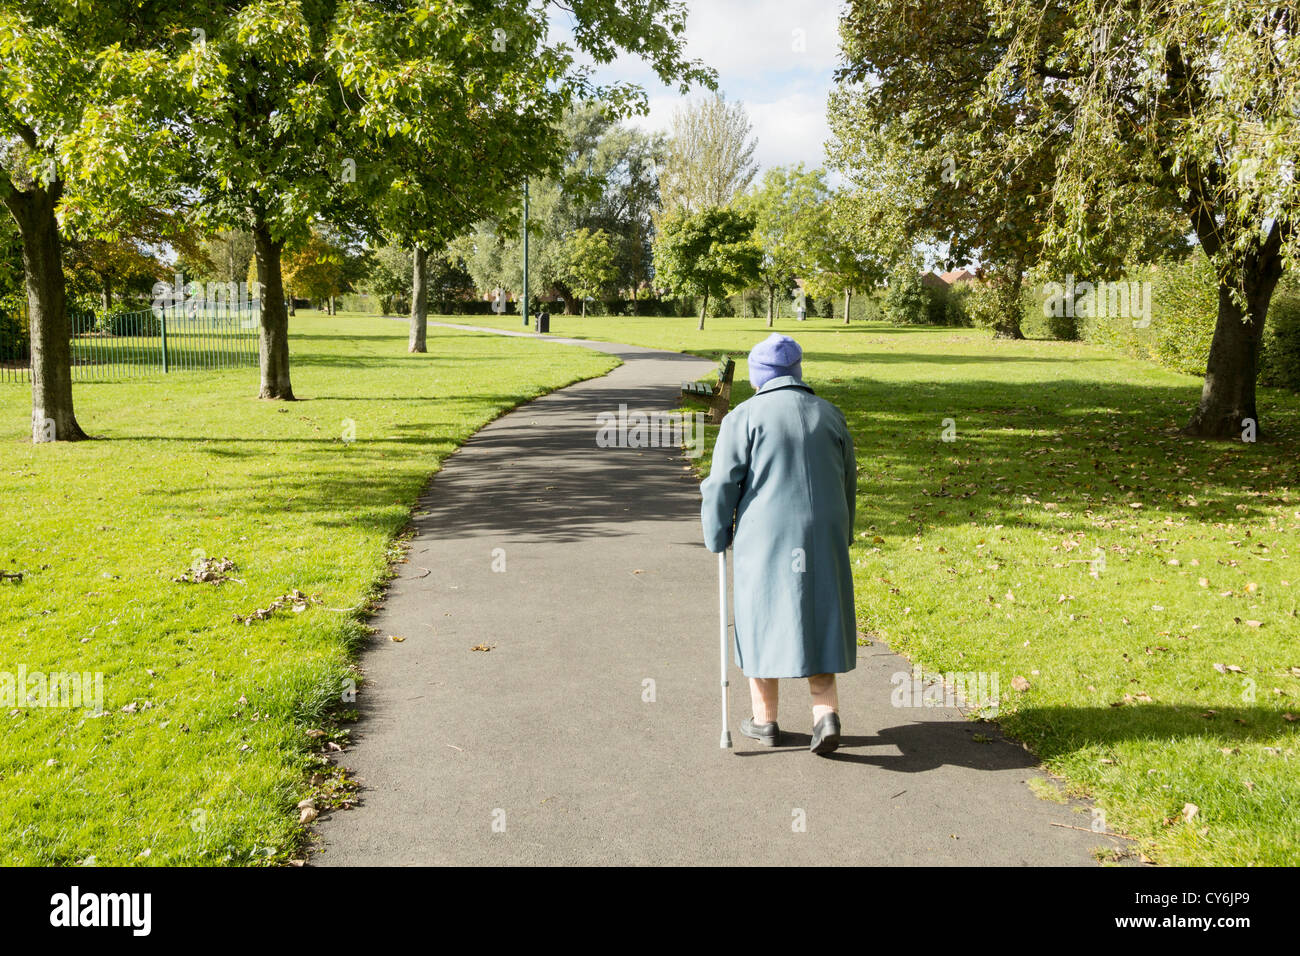 89 YEAR OLD LADY WALKING IN PARK WITH AID OF WALKING STICK IN BILLINGHAM, CLEVELAND, ENGLAND, UK Stock Photo